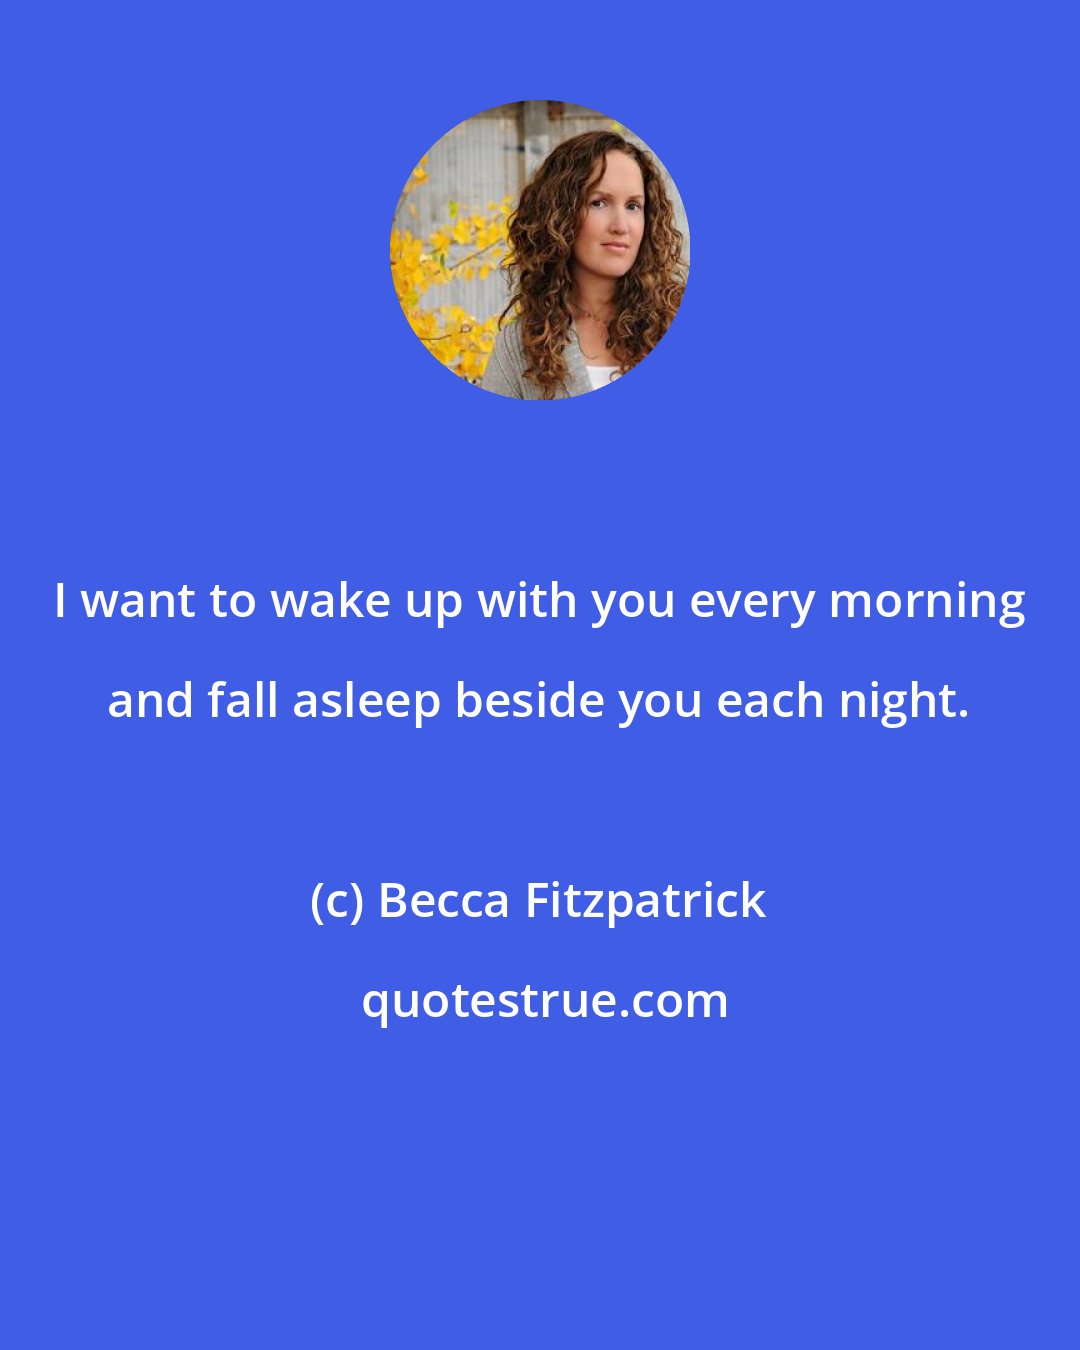 Becca Fitzpatrick: I want to wake up with you every morning and fall asleep beside you each night.